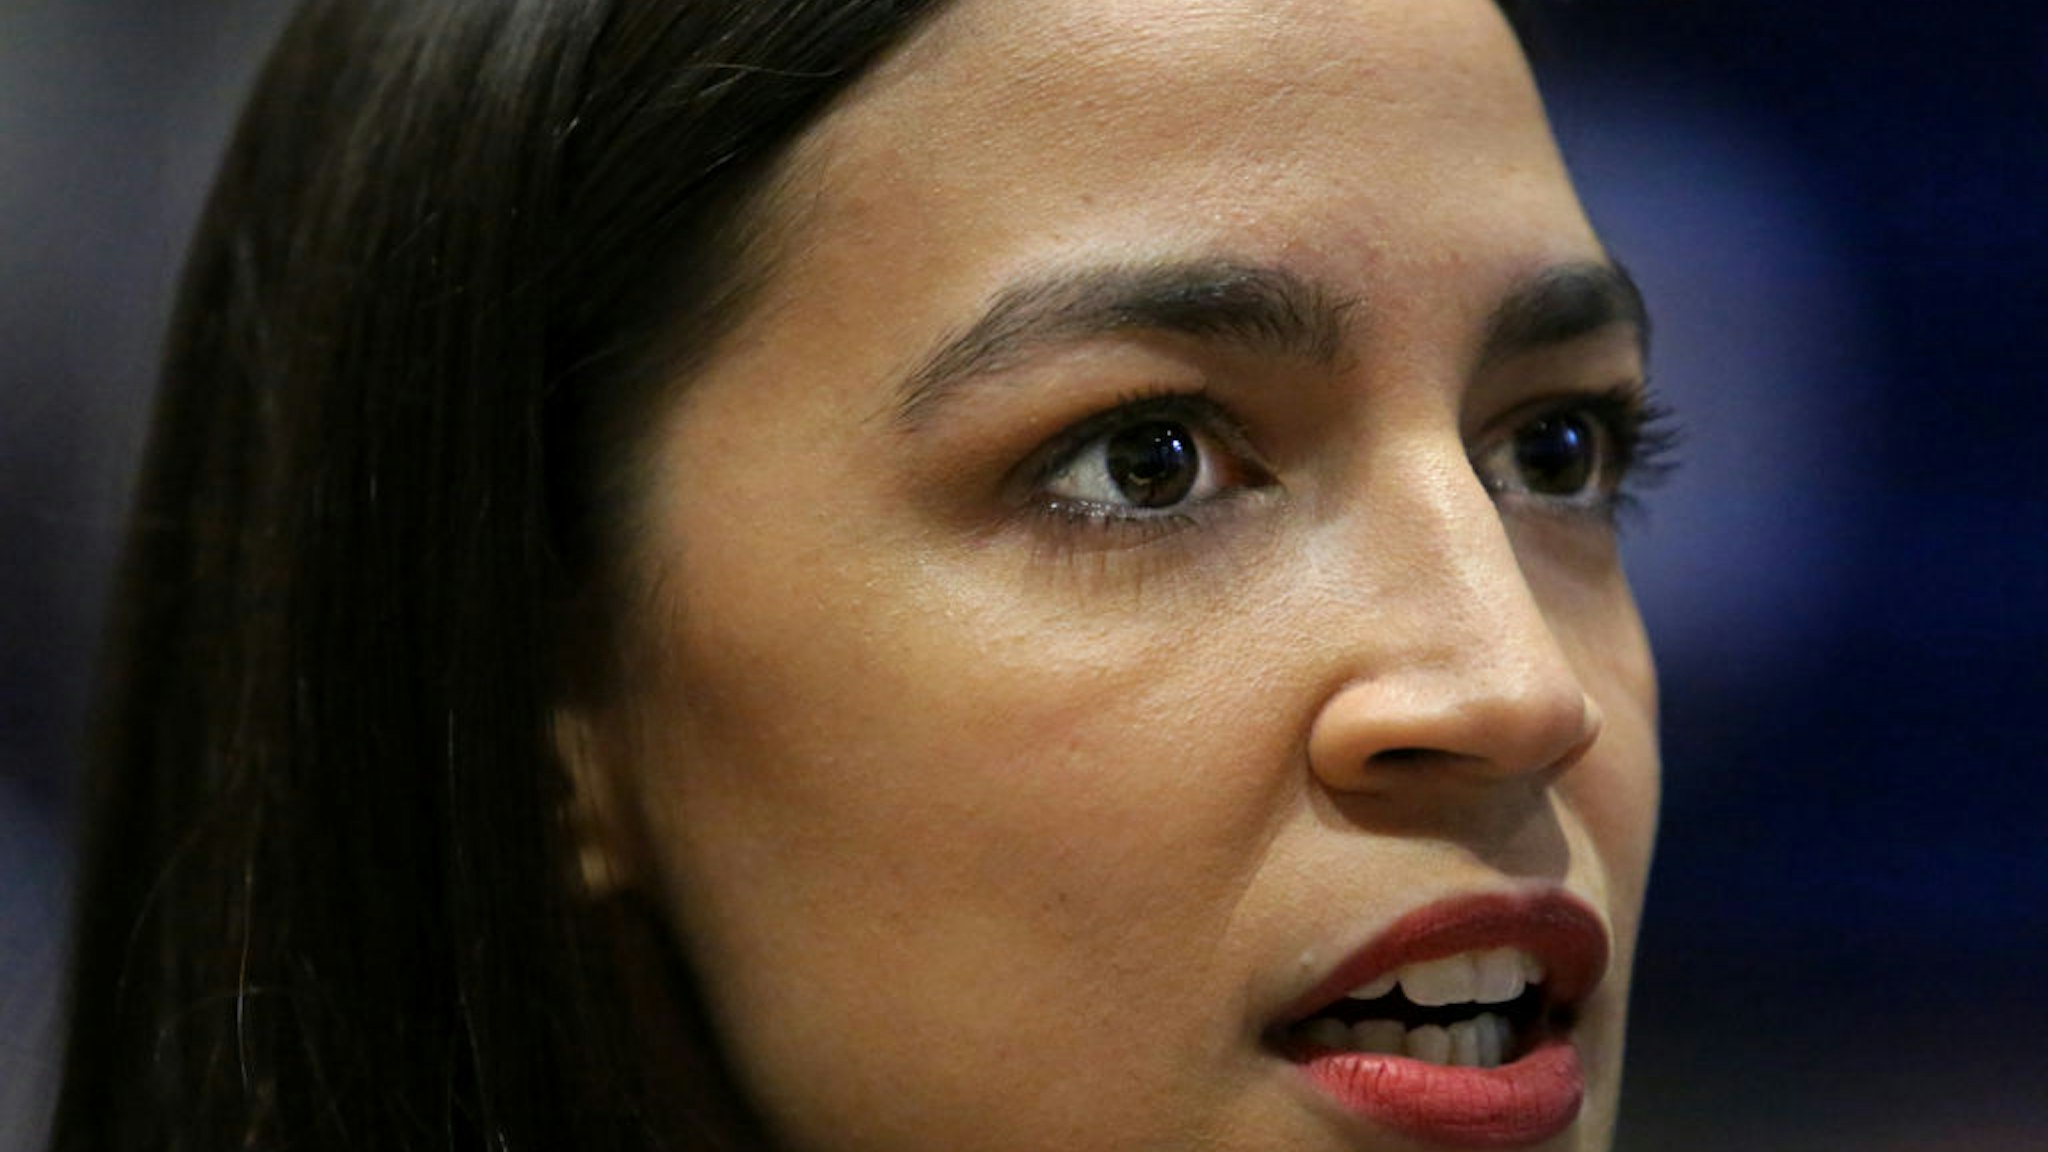 U.S. Rep. Alexandria Ocasio-Cortez (D-NY) speaks with members of the media before a Green New Deal For Public Housing Town Hall on December 14, 2019 in the Queens borough of New York City.